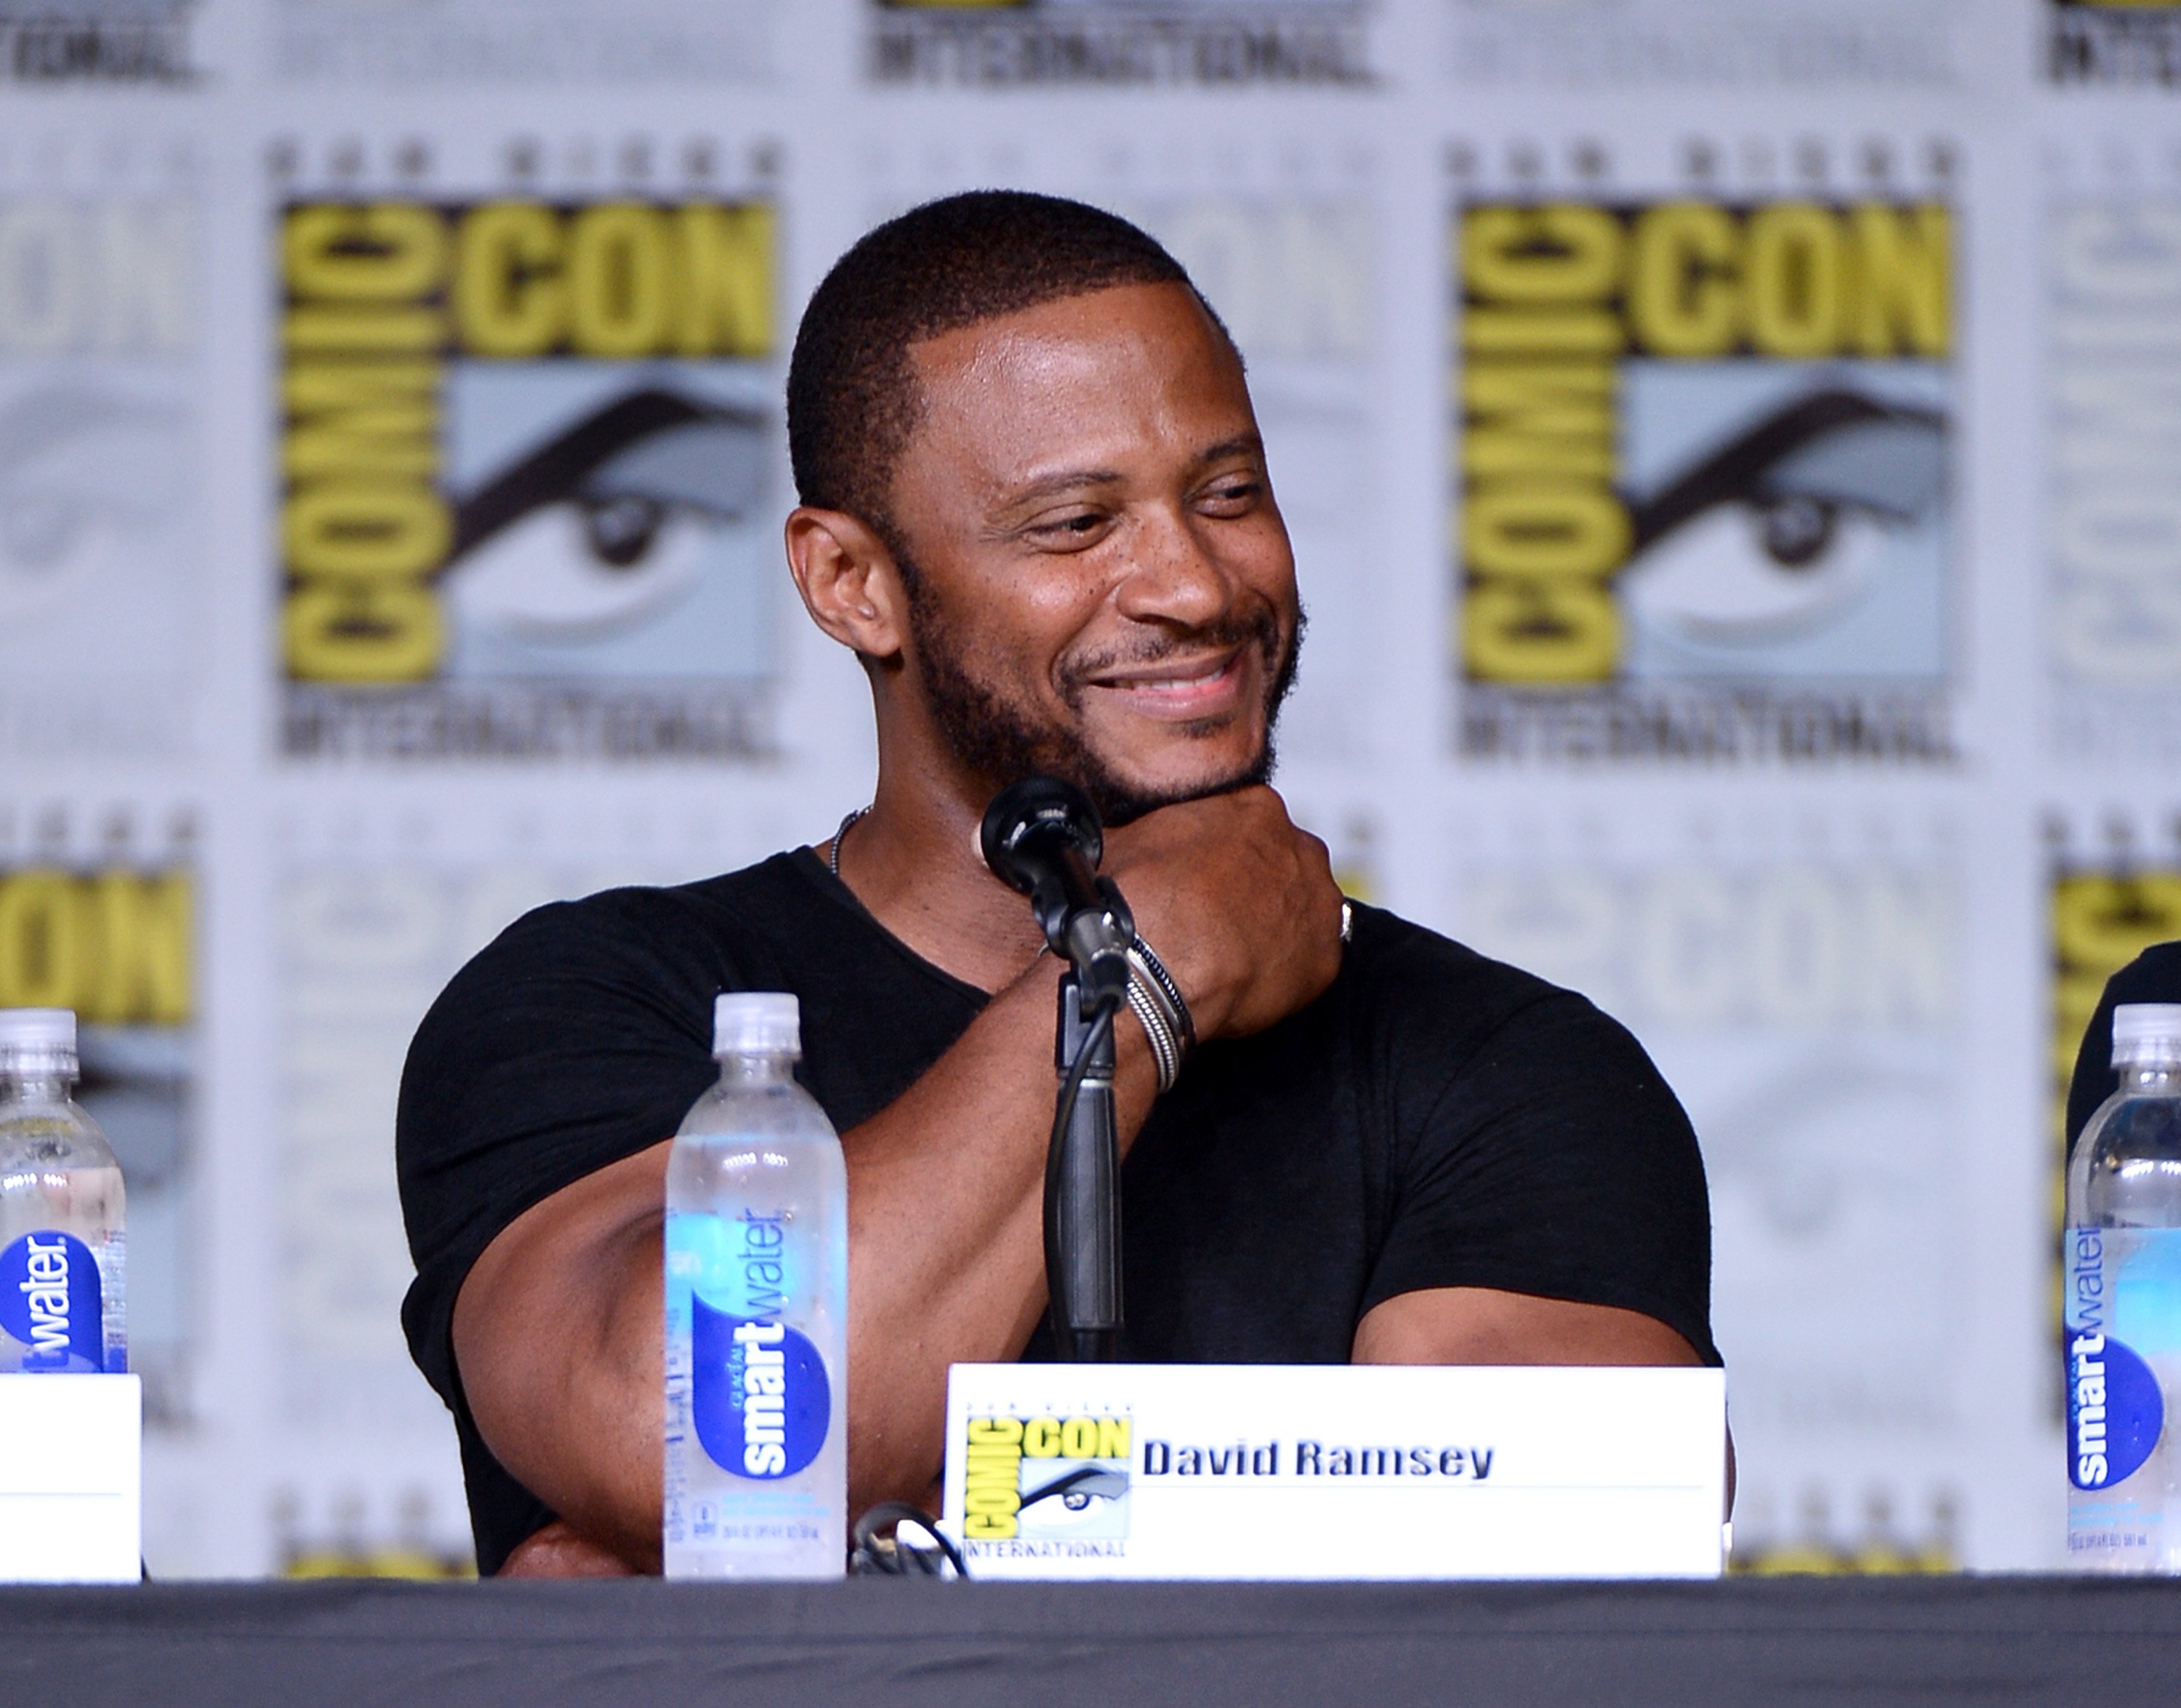 'Supergirl' special guest David Ramsey wears a black t-shirt and speaks at a Comic-Con panel.